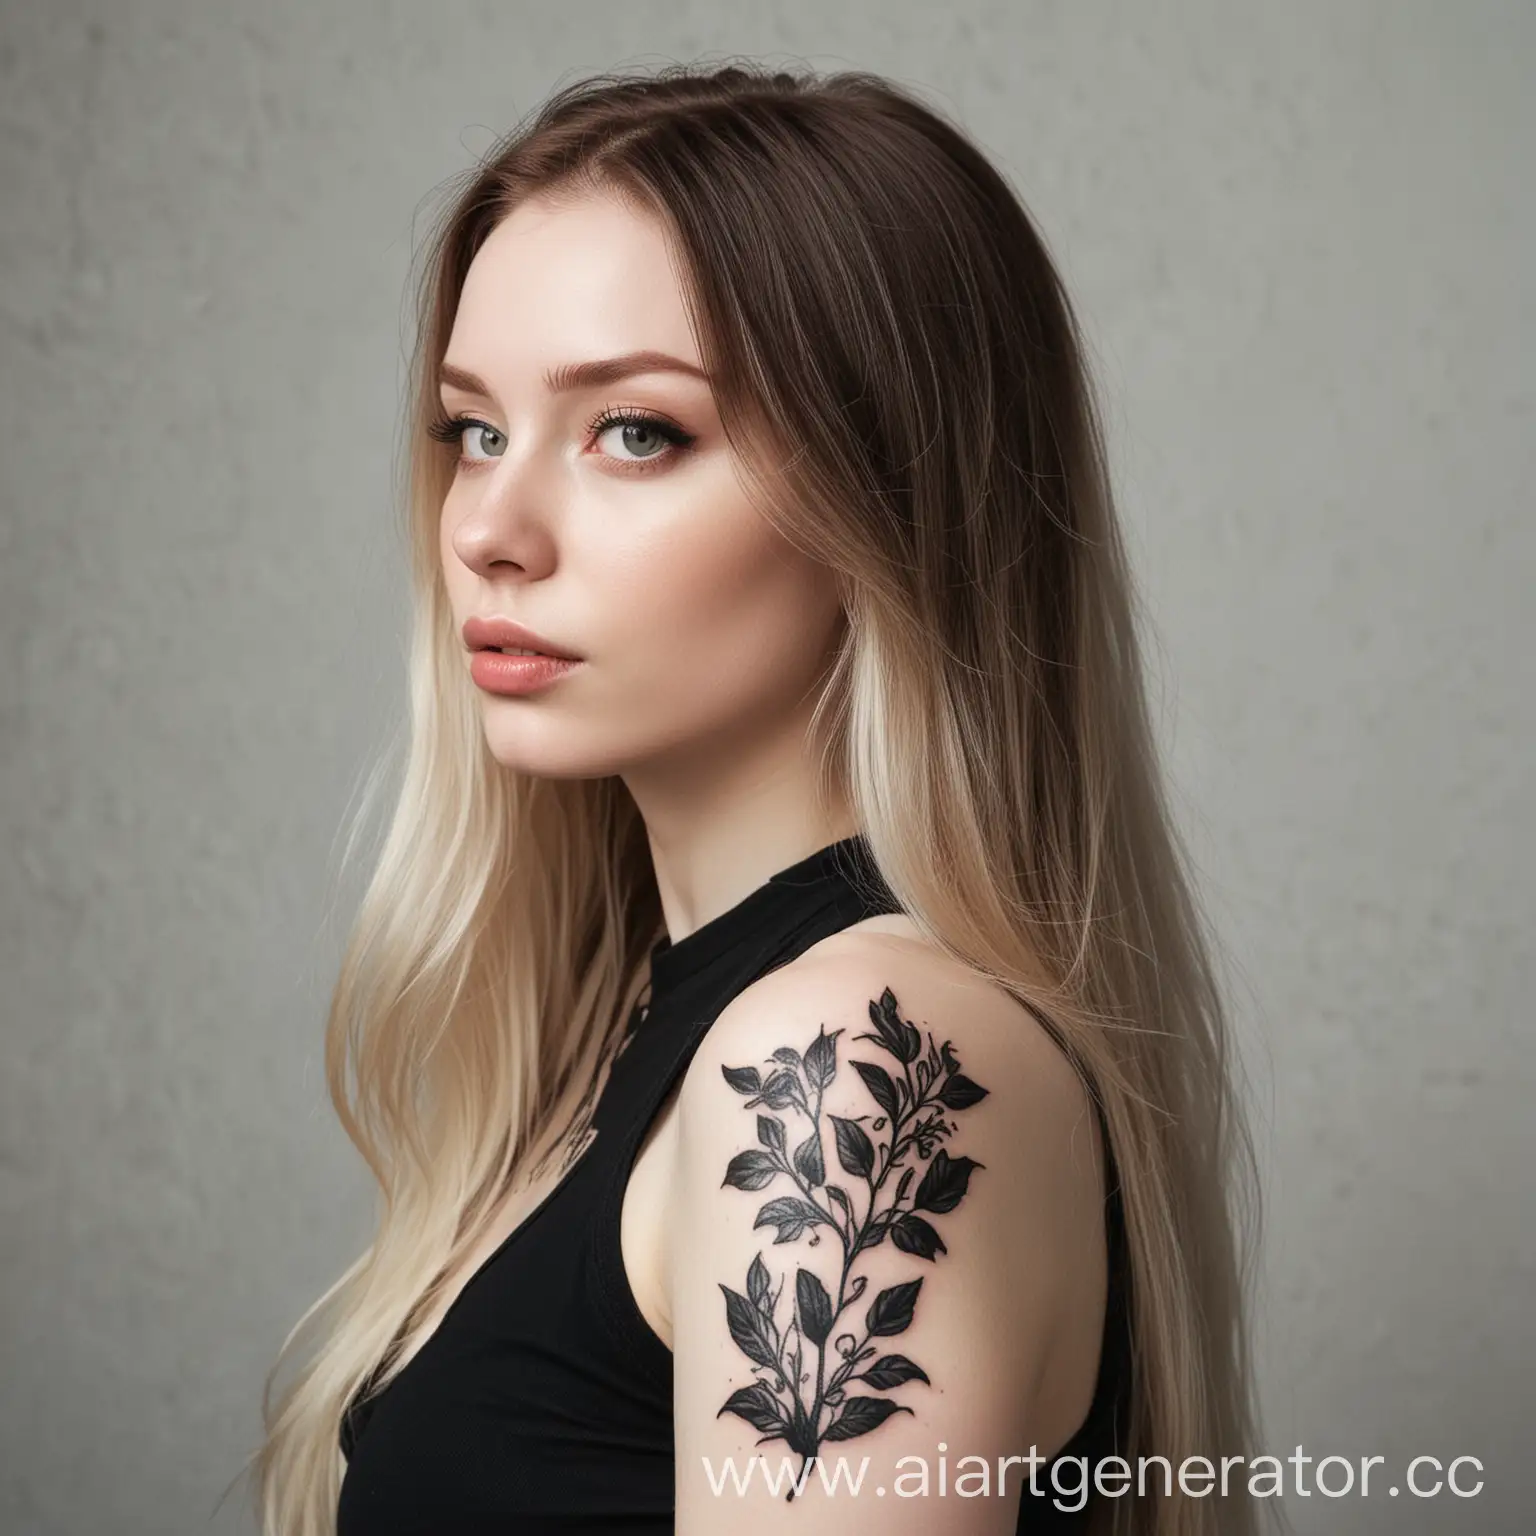 PaleSkinned-Girl-with-Neck-Tattoo-in-Elegant-Black-Attire-and-Long-WineColored-Hair